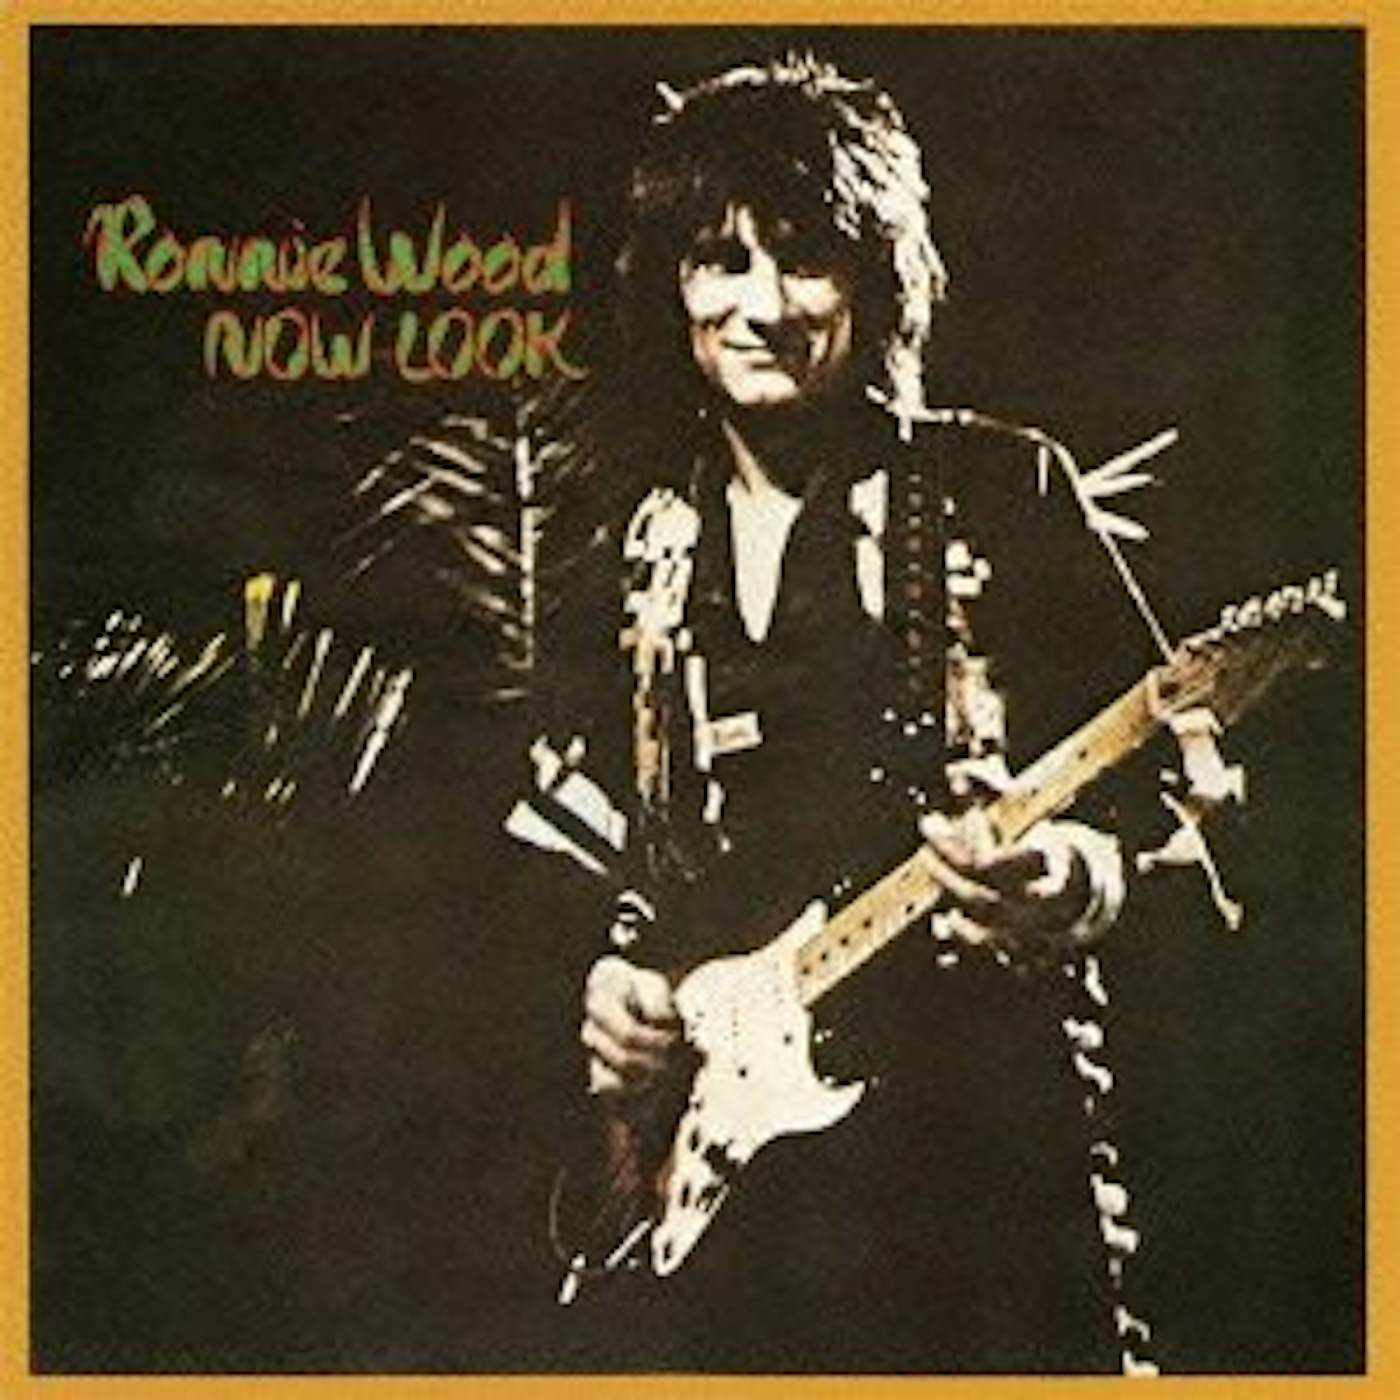 Ronnie Wood NOW LOOK CD